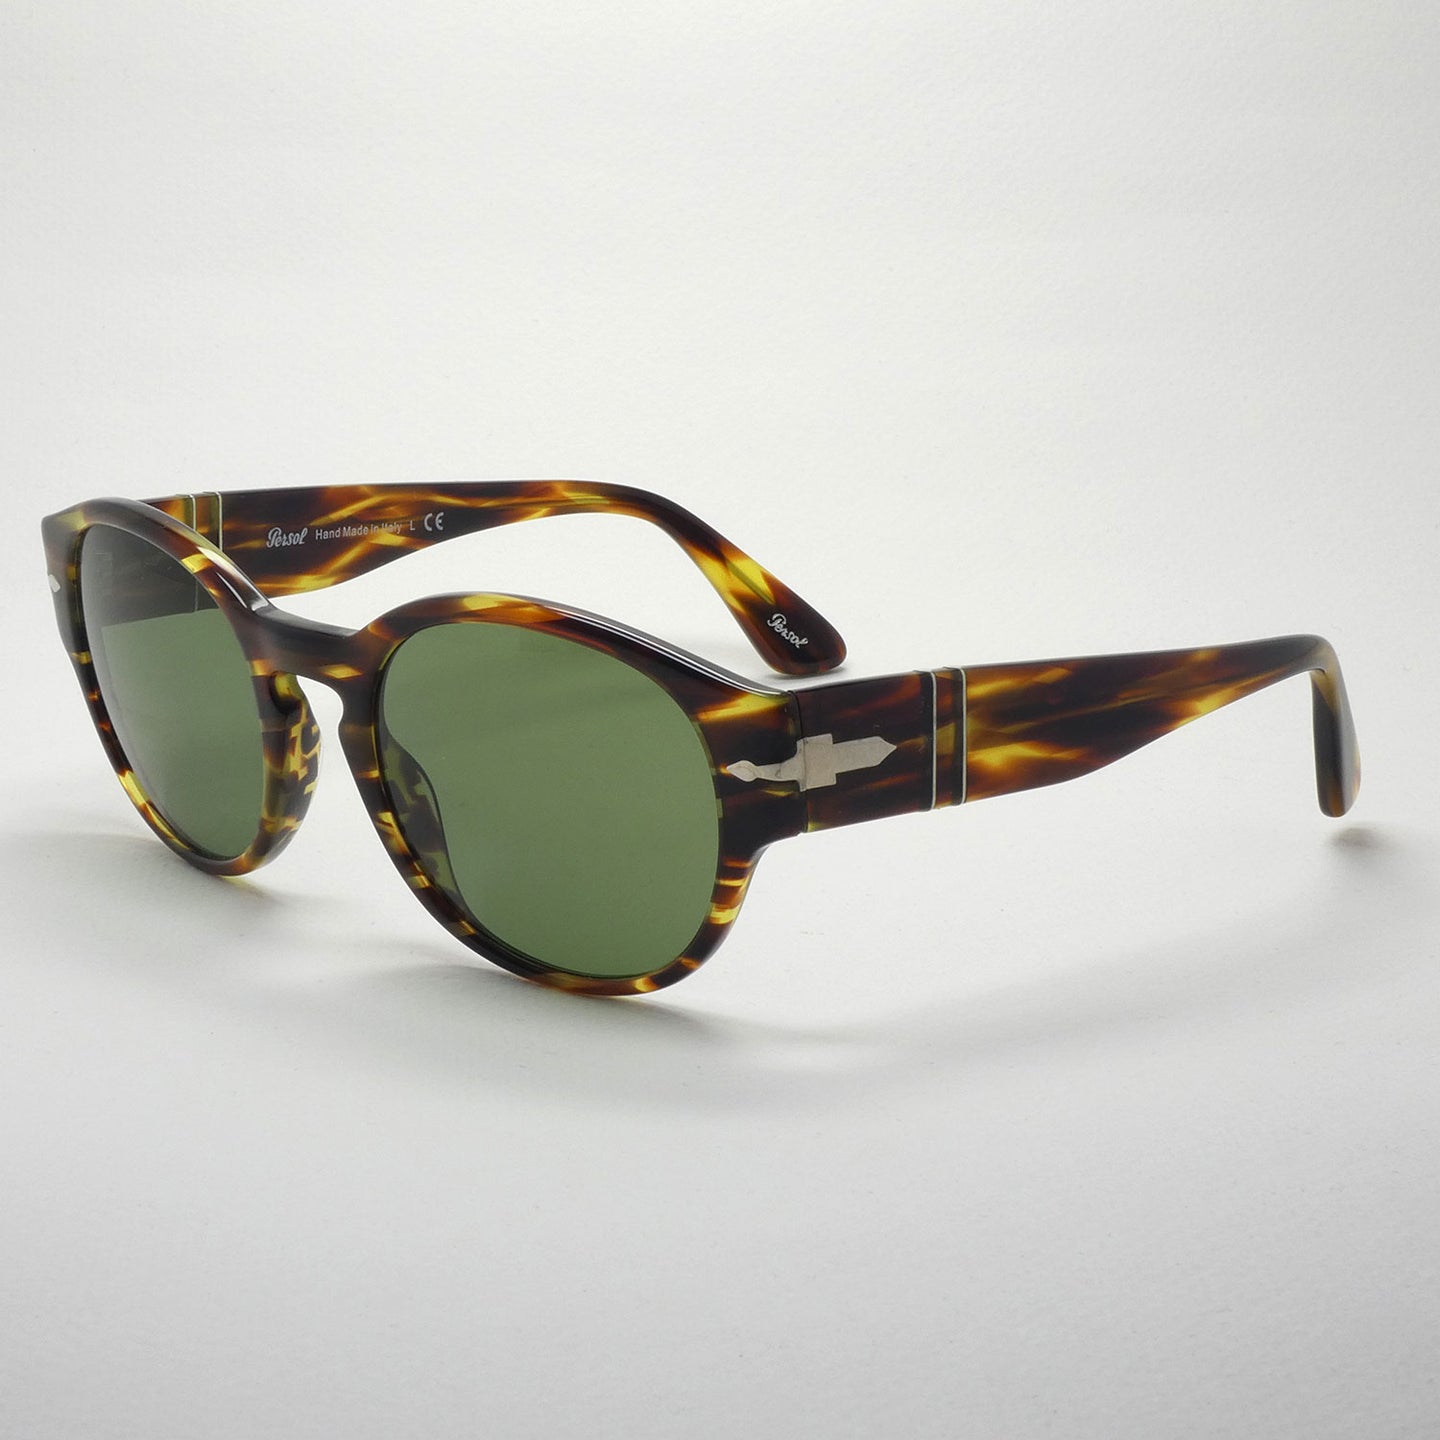 sunglasses persol 3220 938/52 size 52 angled view